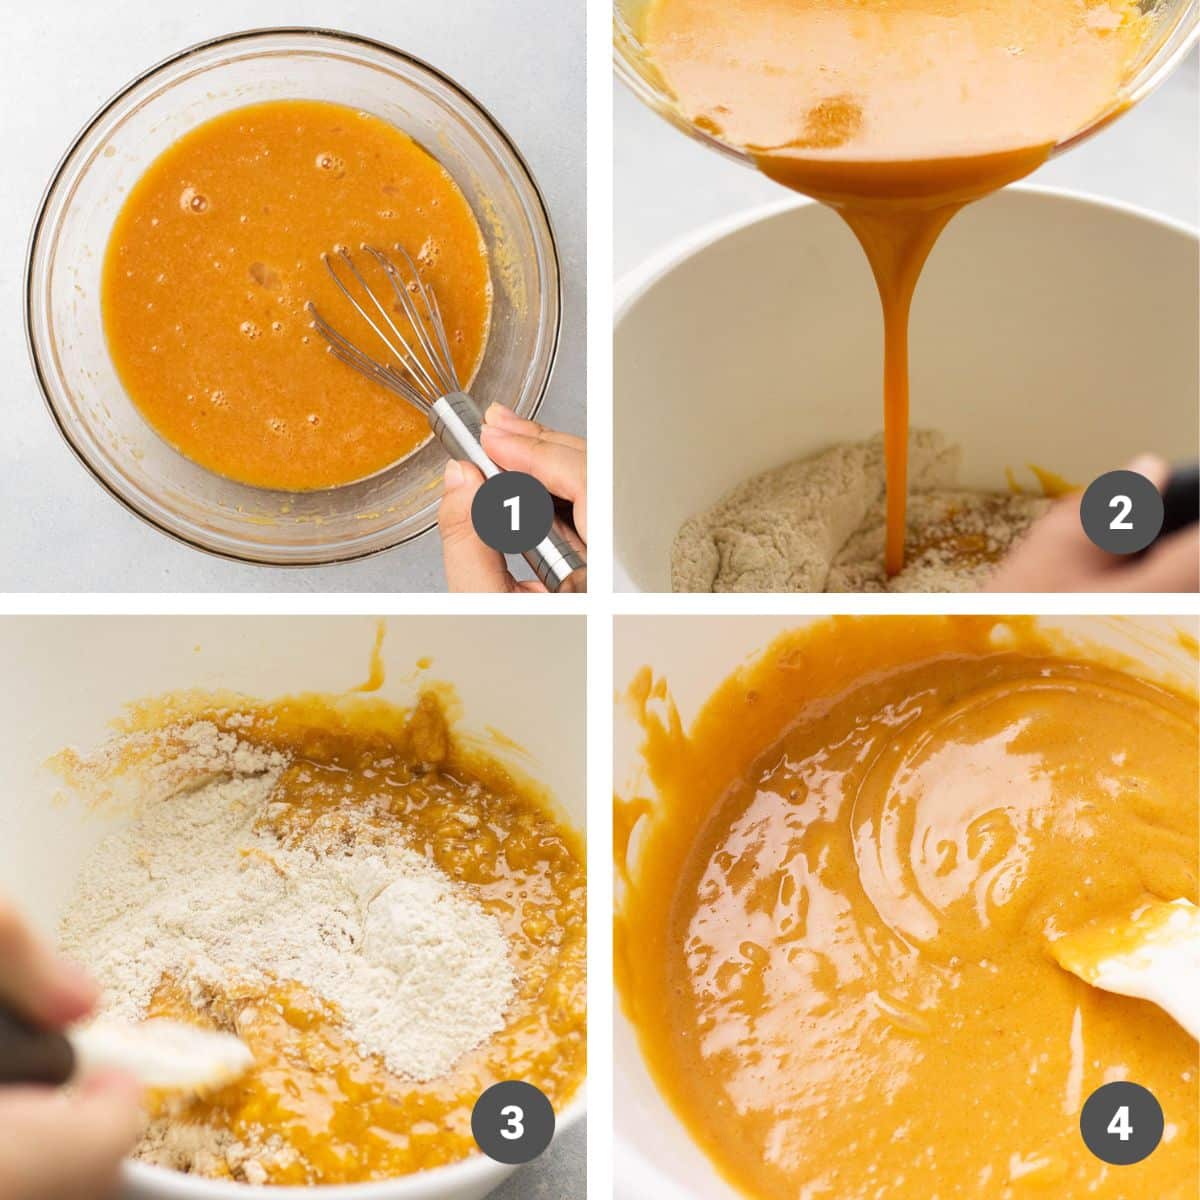 Mixing butterscotch cake batter together in a large mixing bowl.